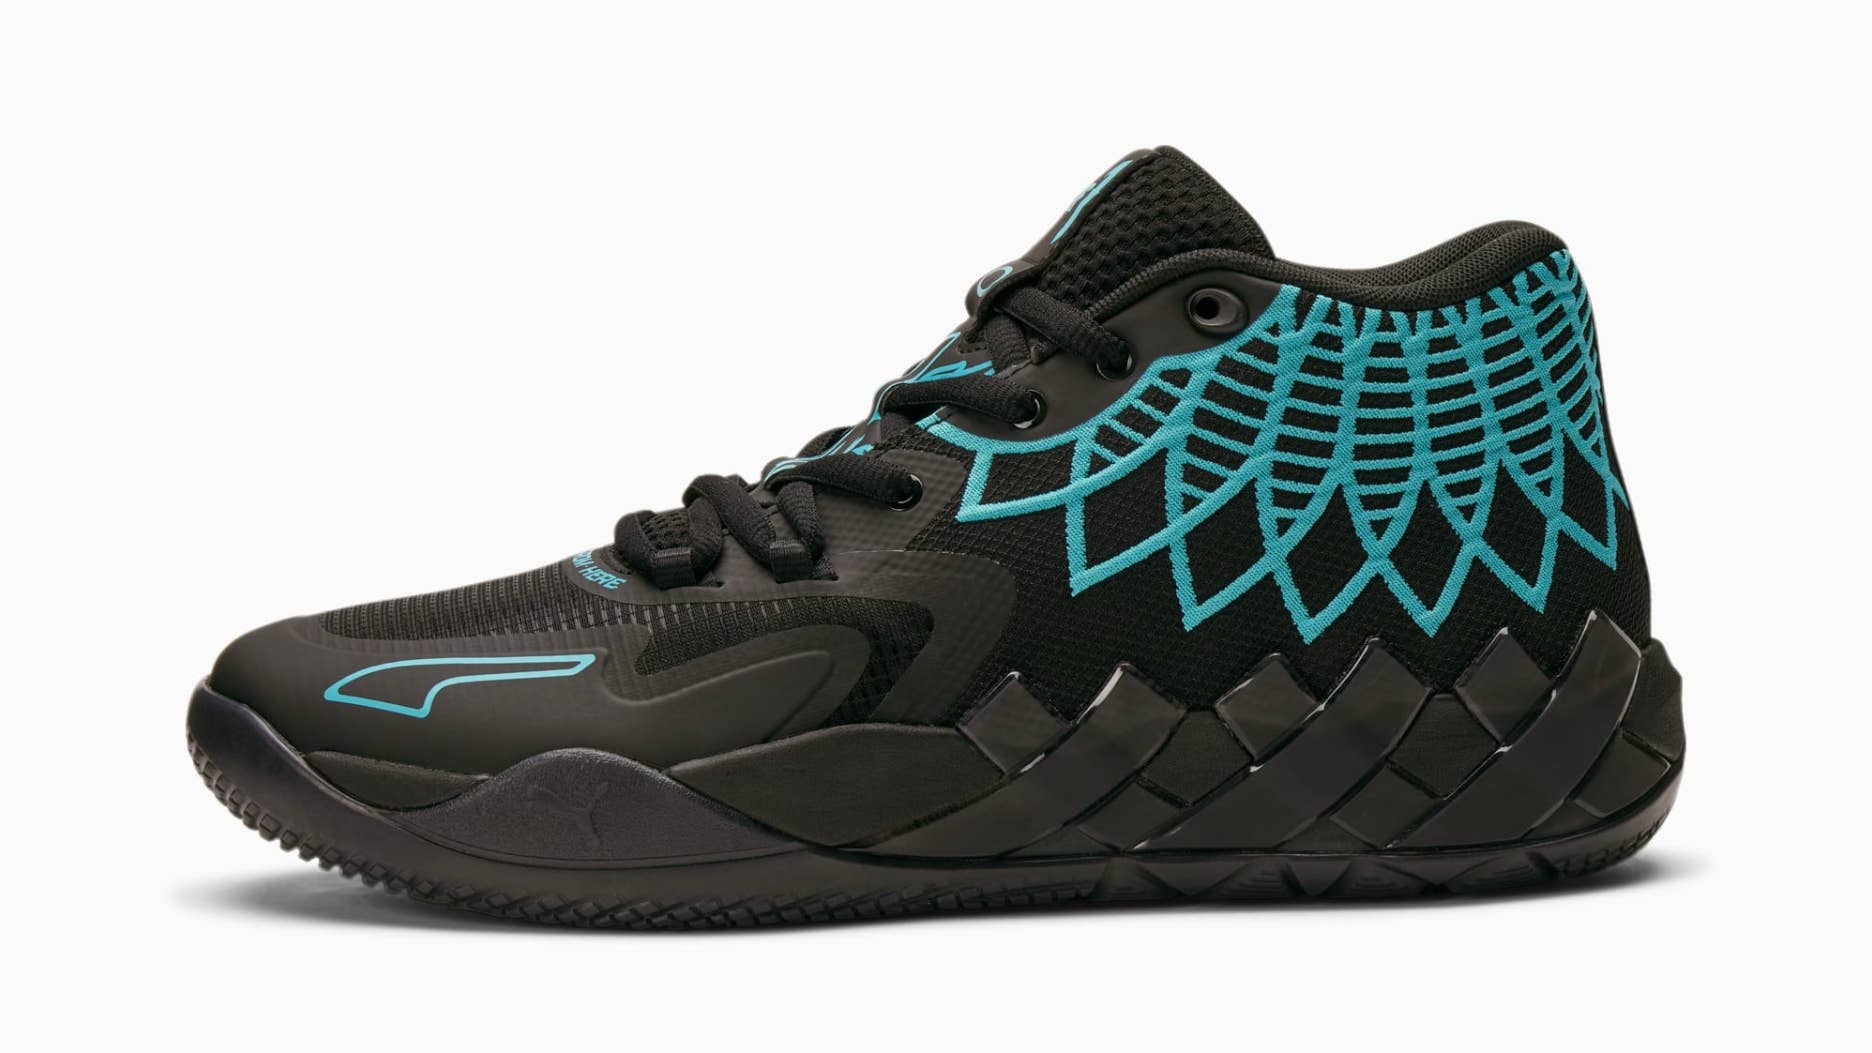 Hornets-Inspired Puma MB.01 Arrives in February | Complex